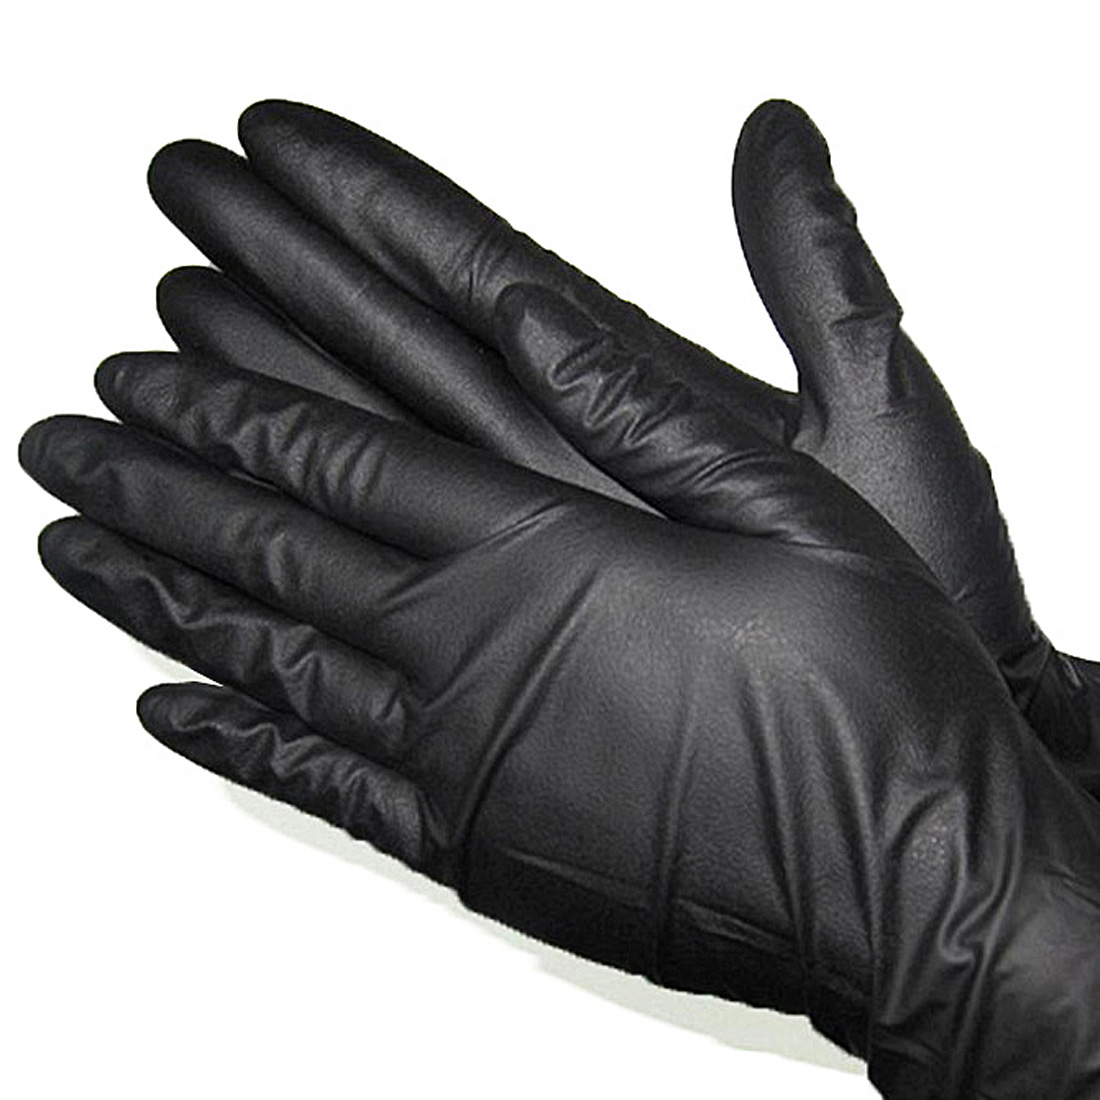 Gloves Black Nitrile Powder Free Large 5-6mil 10/100ct GPNB - Sold by EA - Click Image to Close